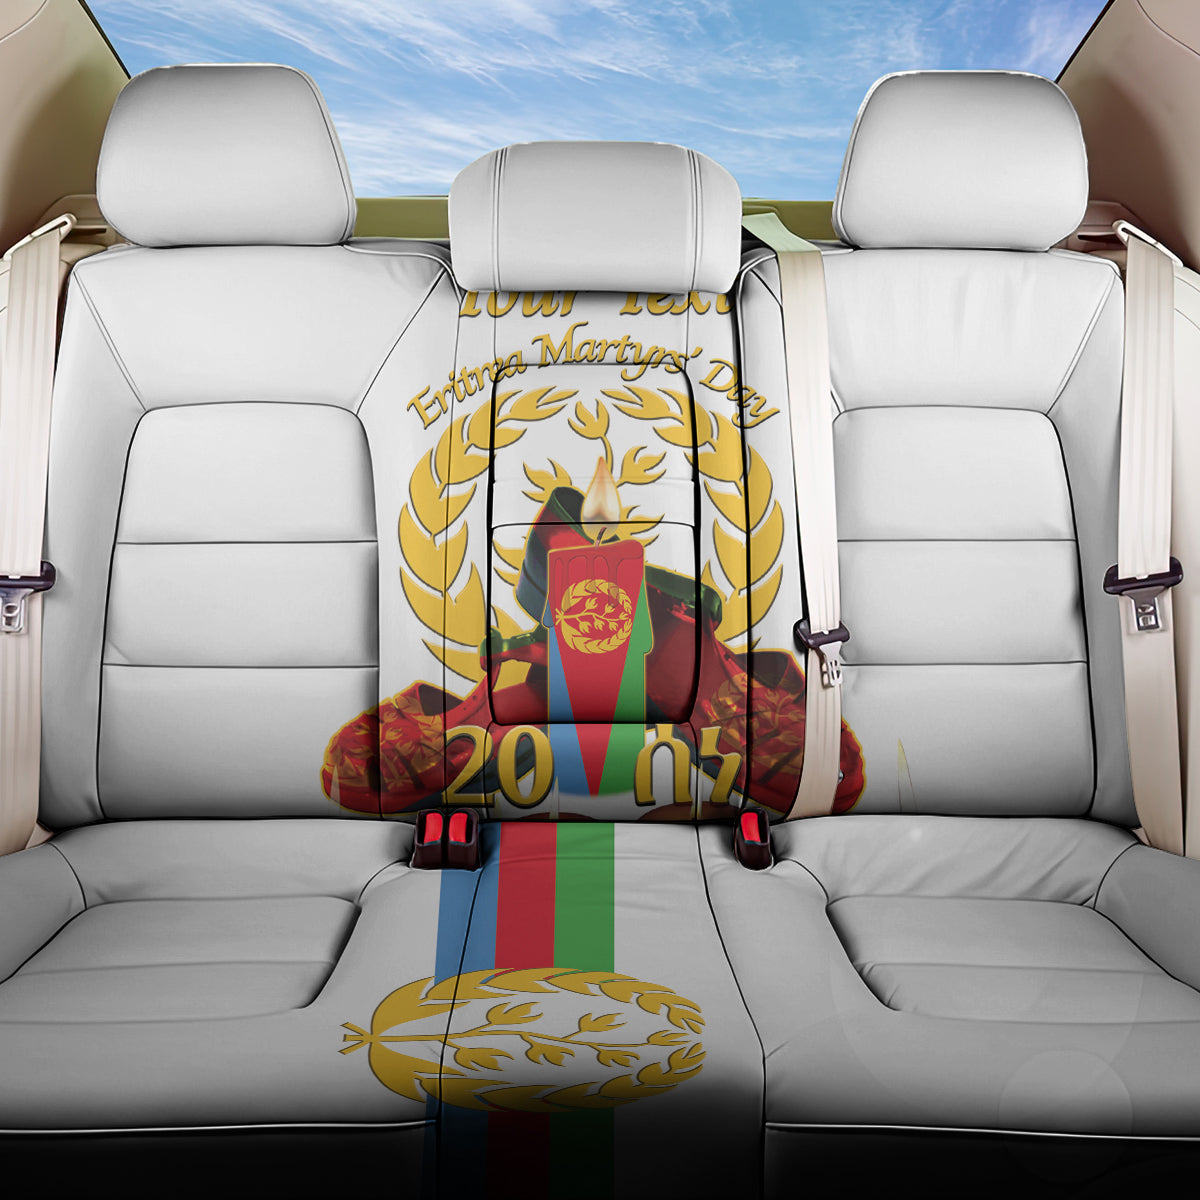 Custom Eritrea Martyrs' Day Back Car Seat Cover 20 June Shida Shoes With Candles - White